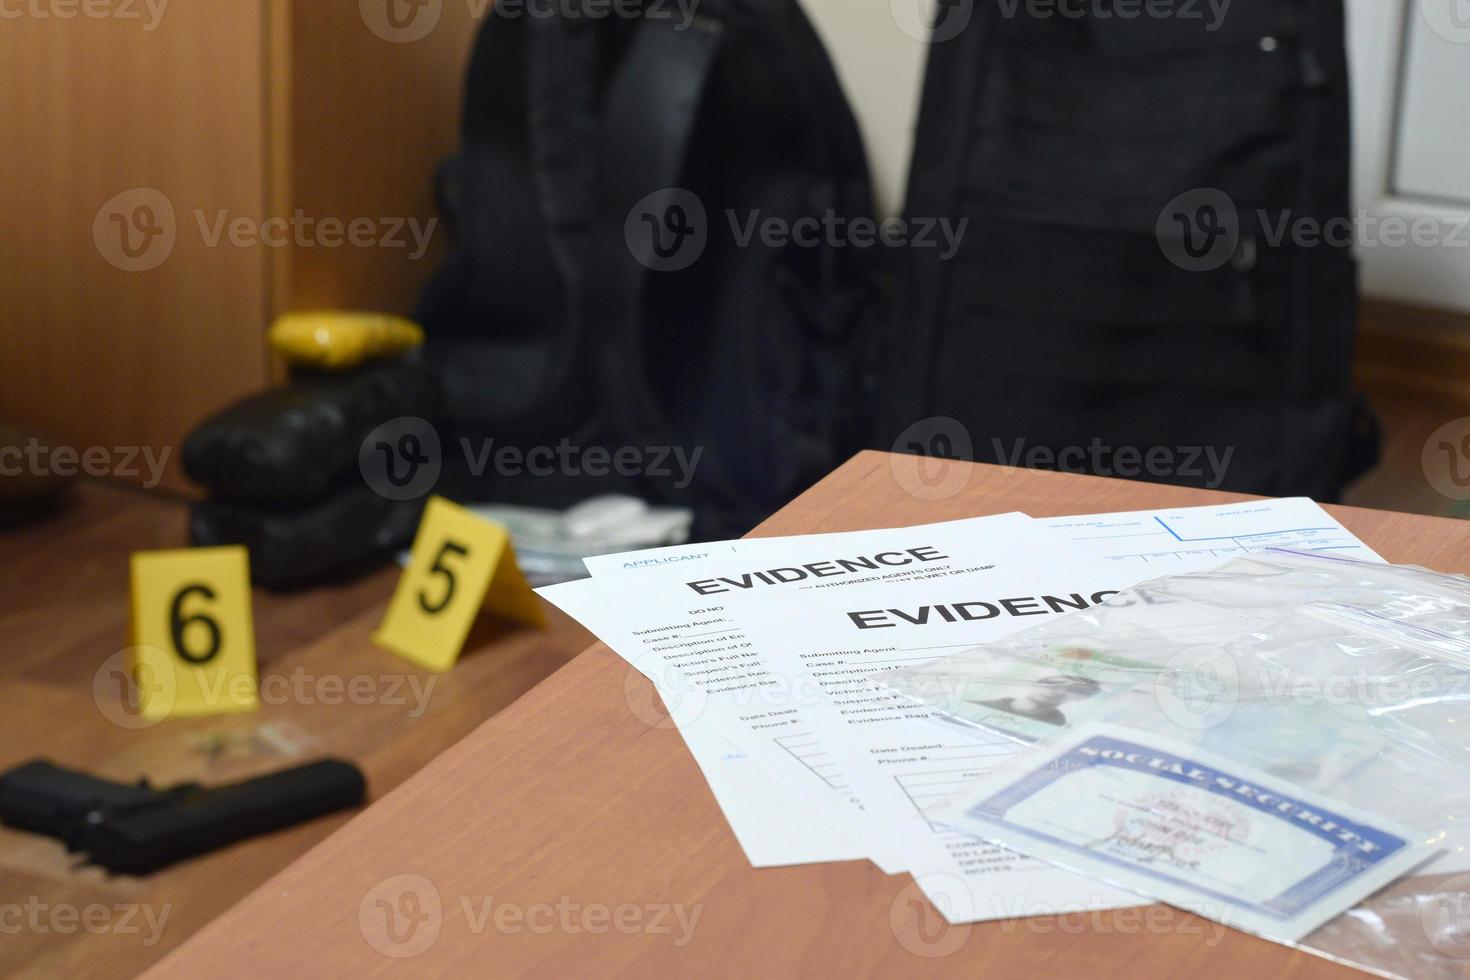 Evidence Labels and green card with ssn number lies on table with big amount of items as evidence in crime scene investigation process on backdrop photo